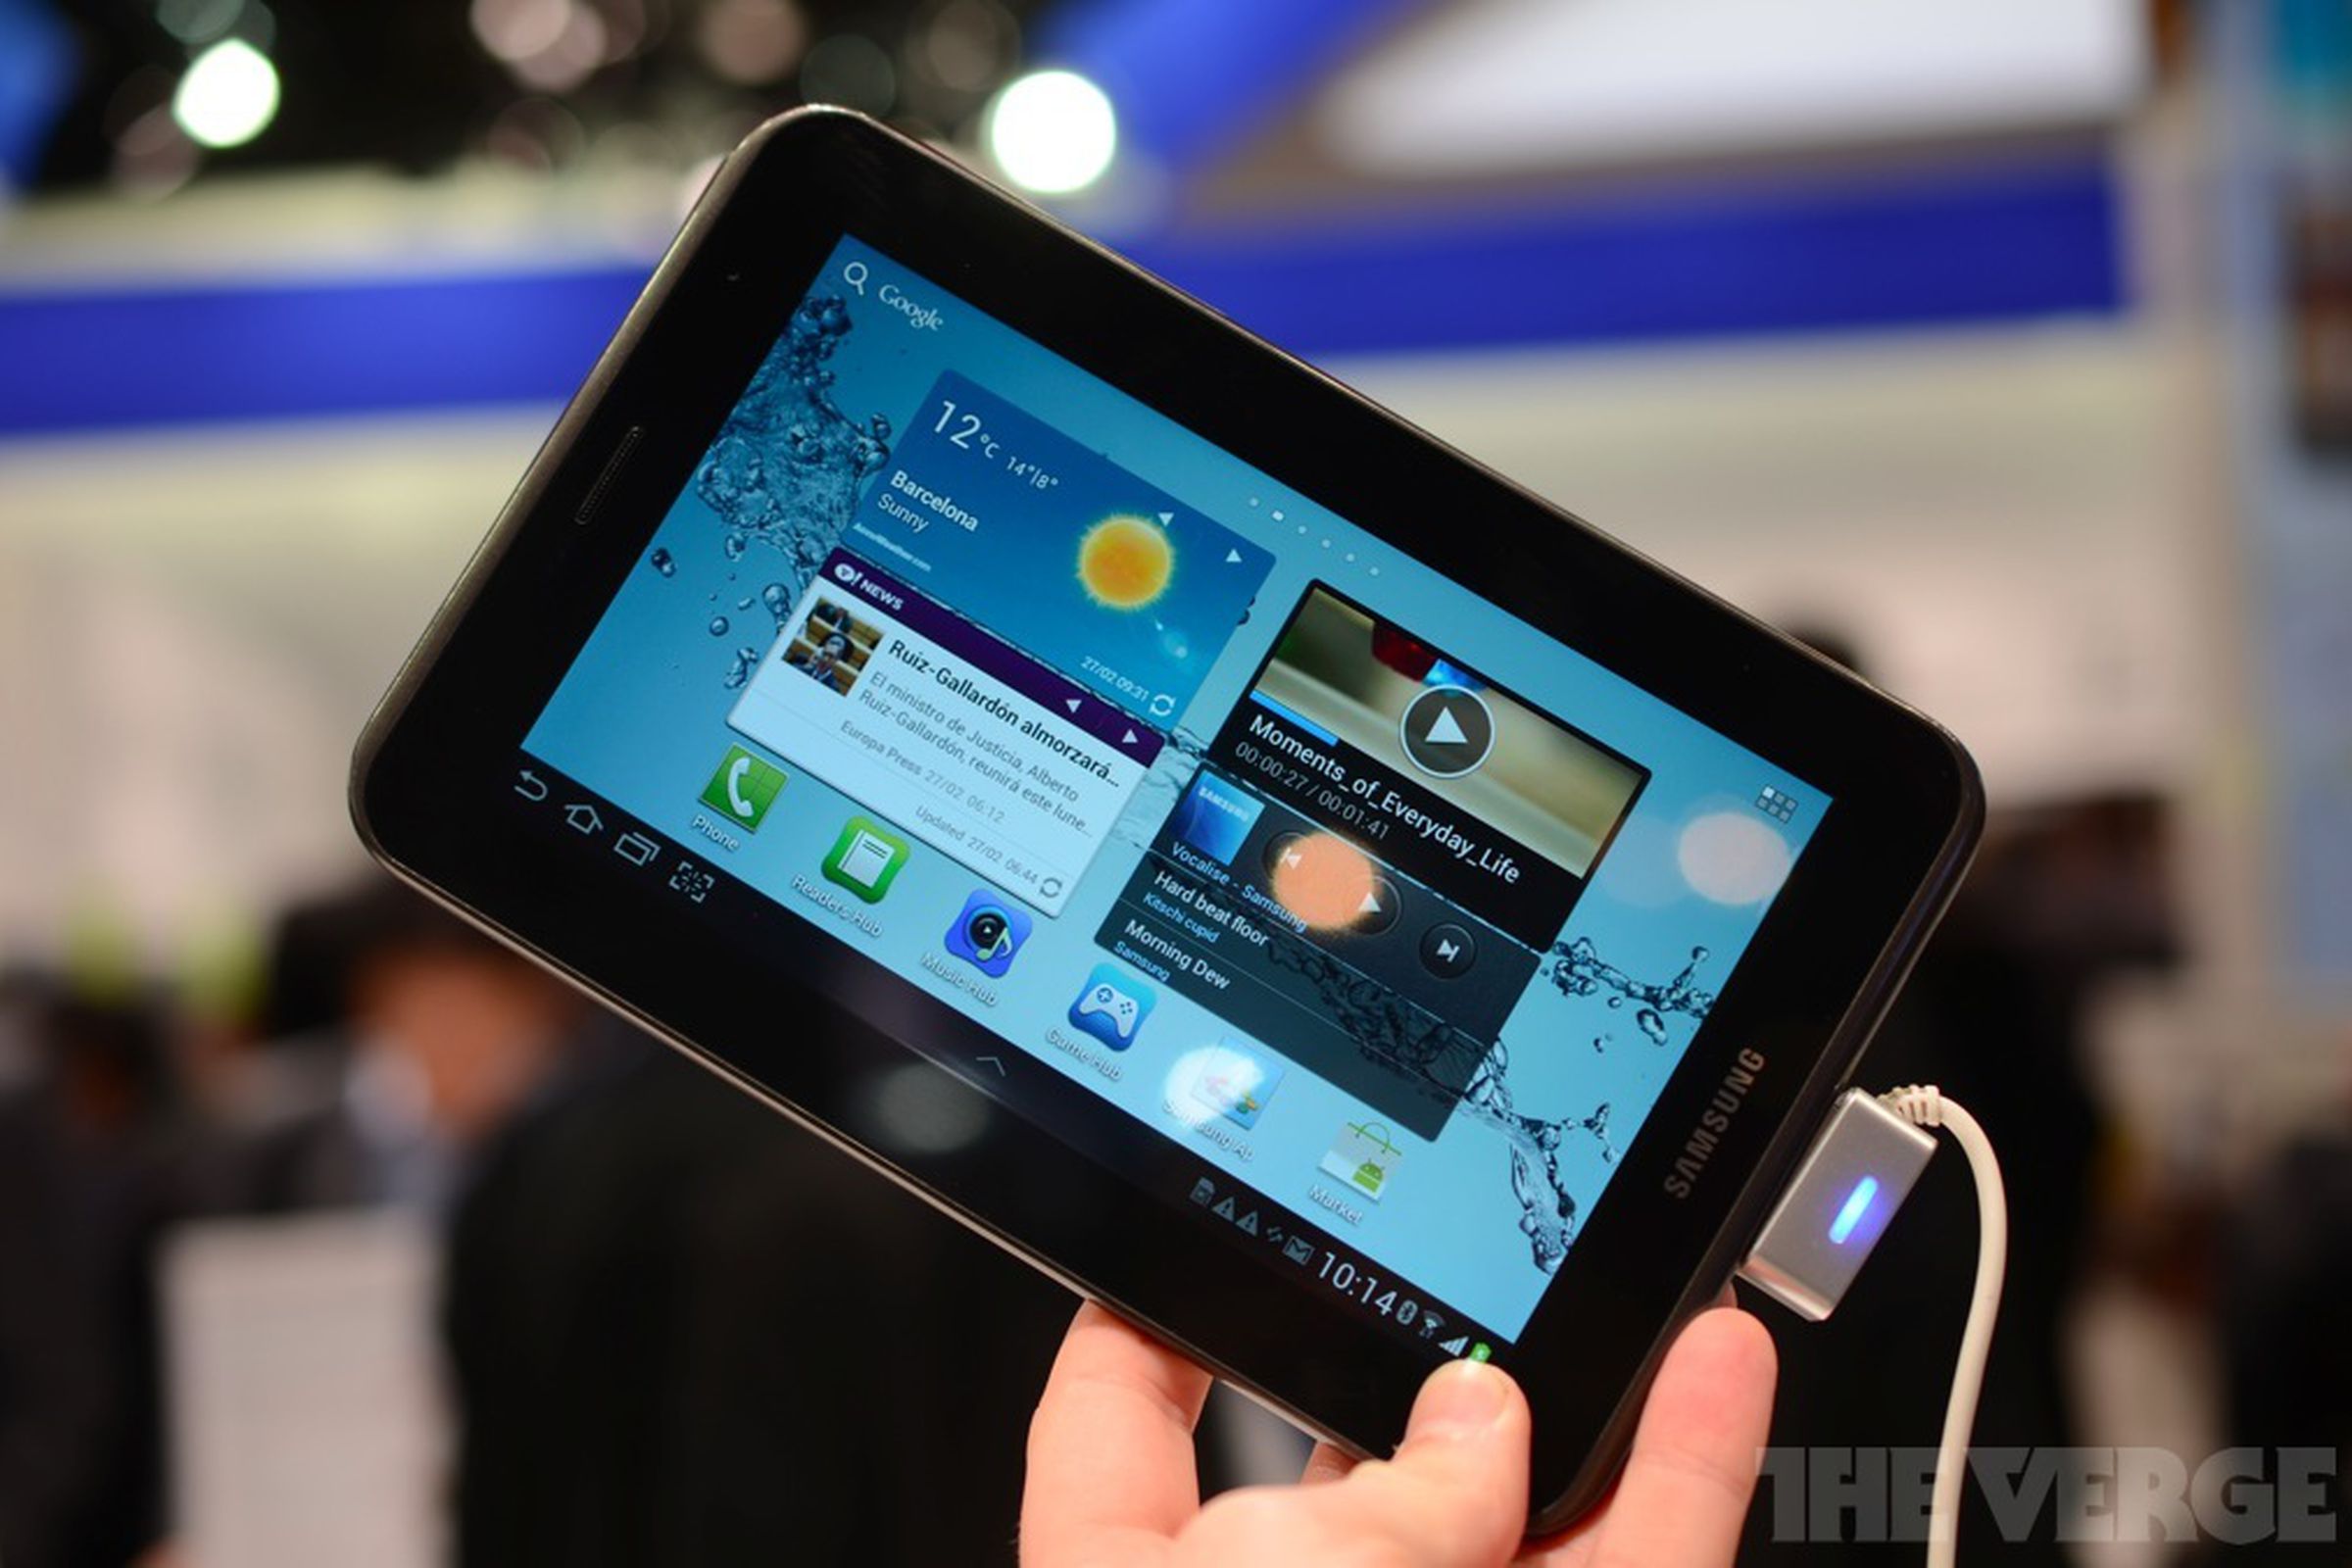 Gallery Photo: Samsung Galaxy Tab 7.0 and 10.1 hands-on pictures